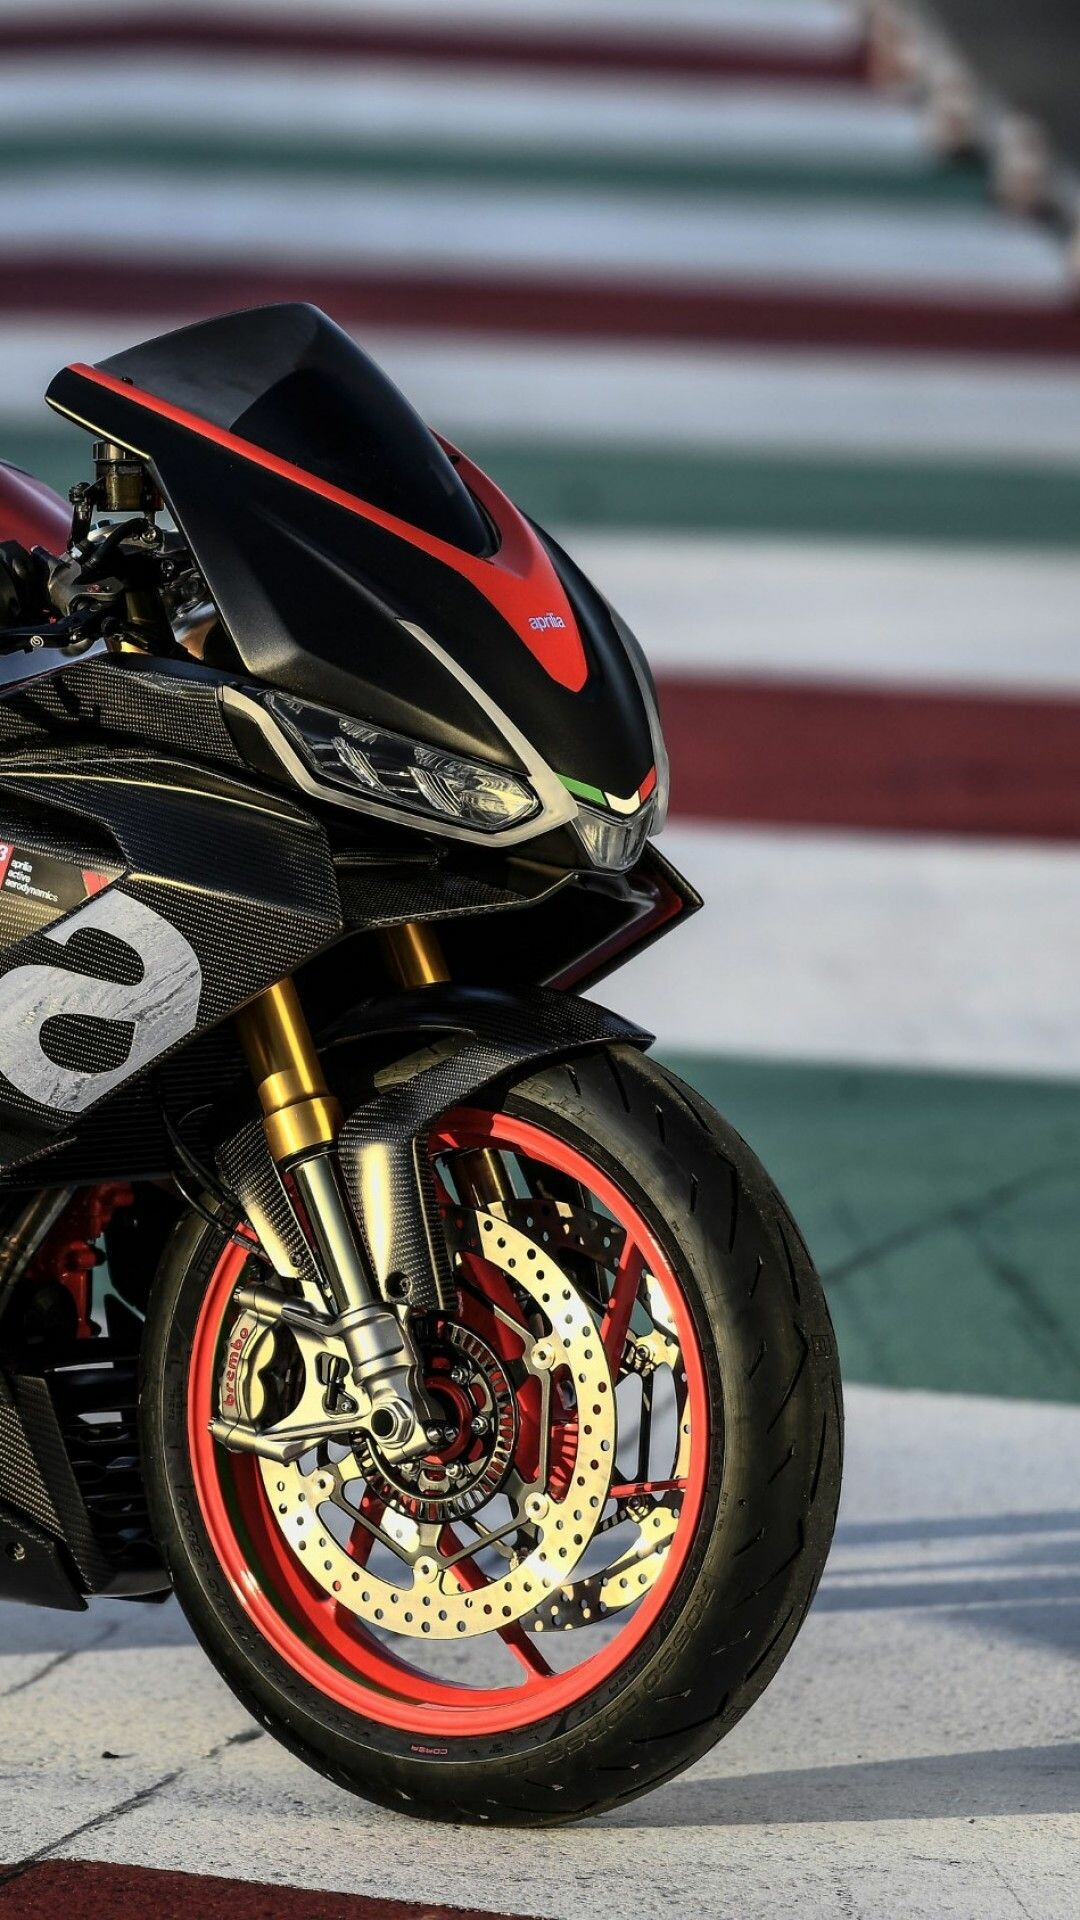 Aprilia: Italian motorcycle brand headquartered in the city of Noale, Italy, RS 660. 1080x1920 Full HD Background.